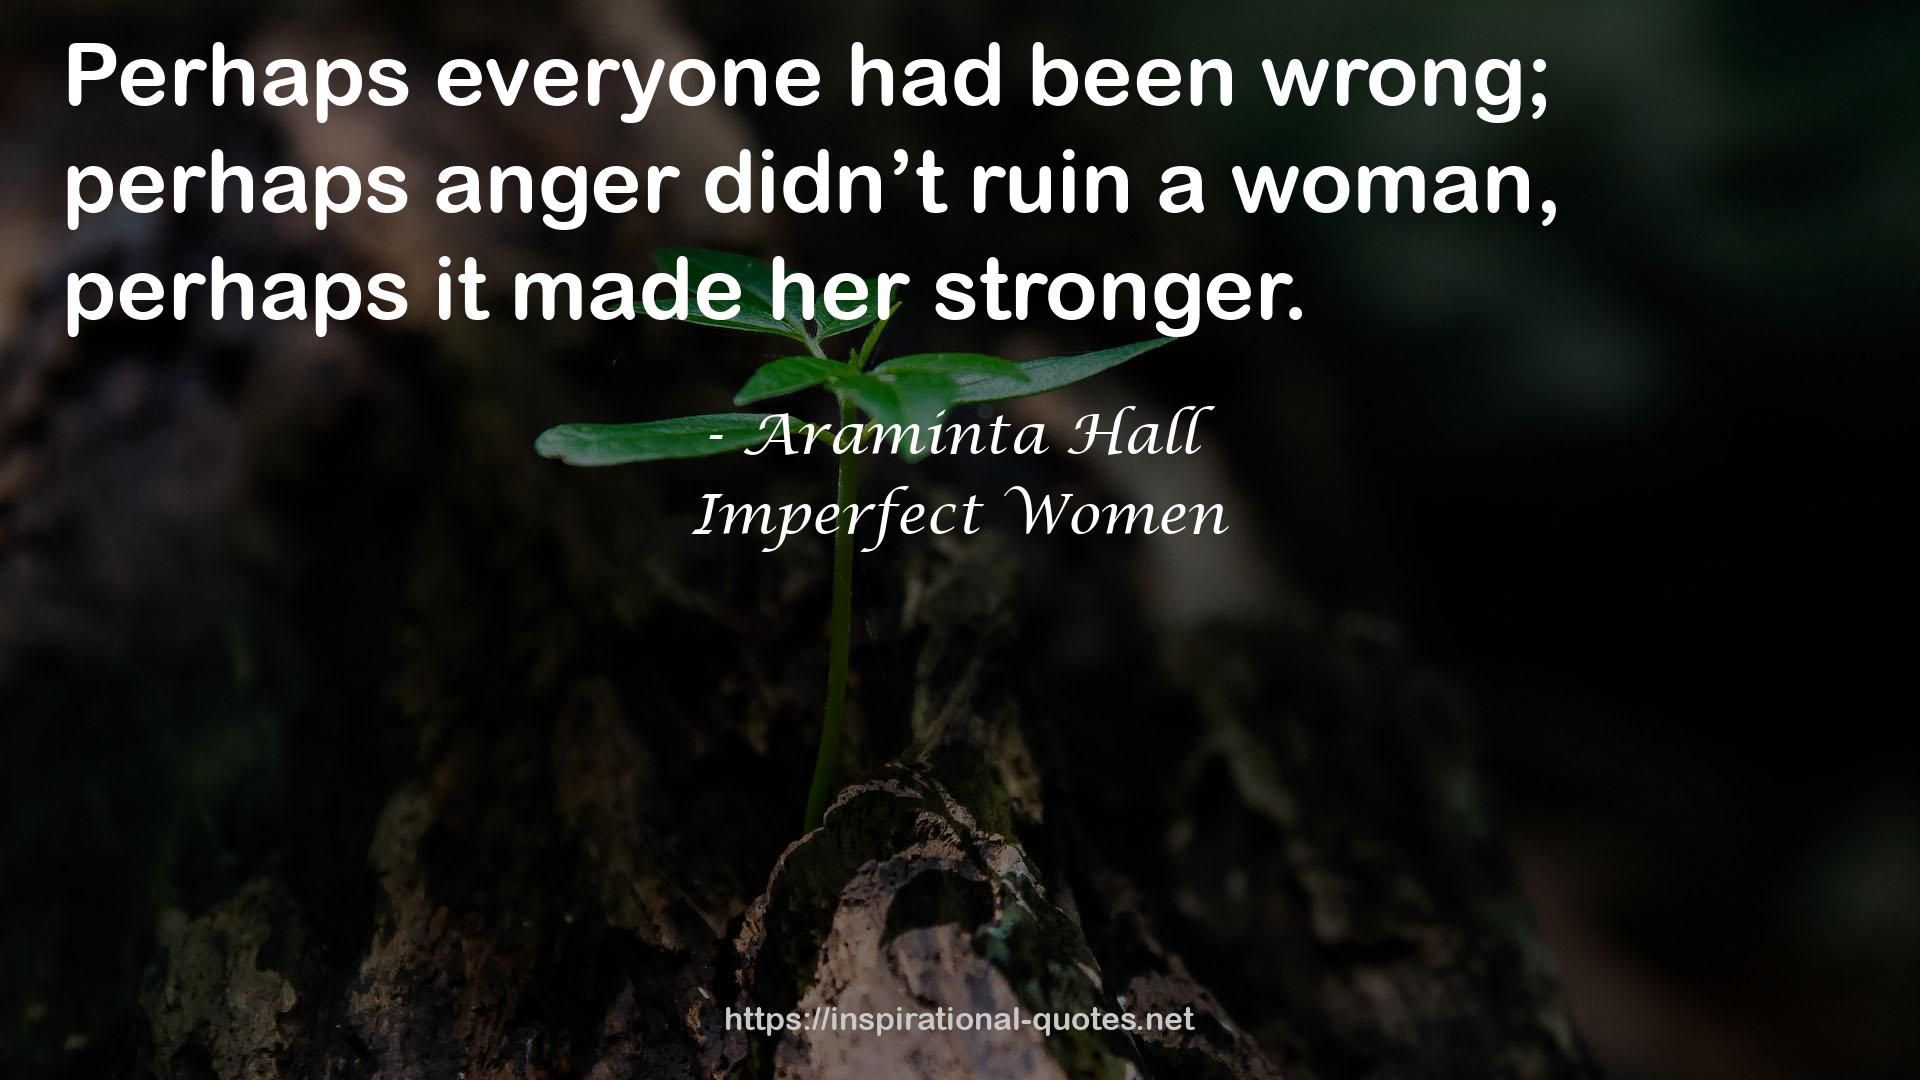 Imperfect Women QUOTES